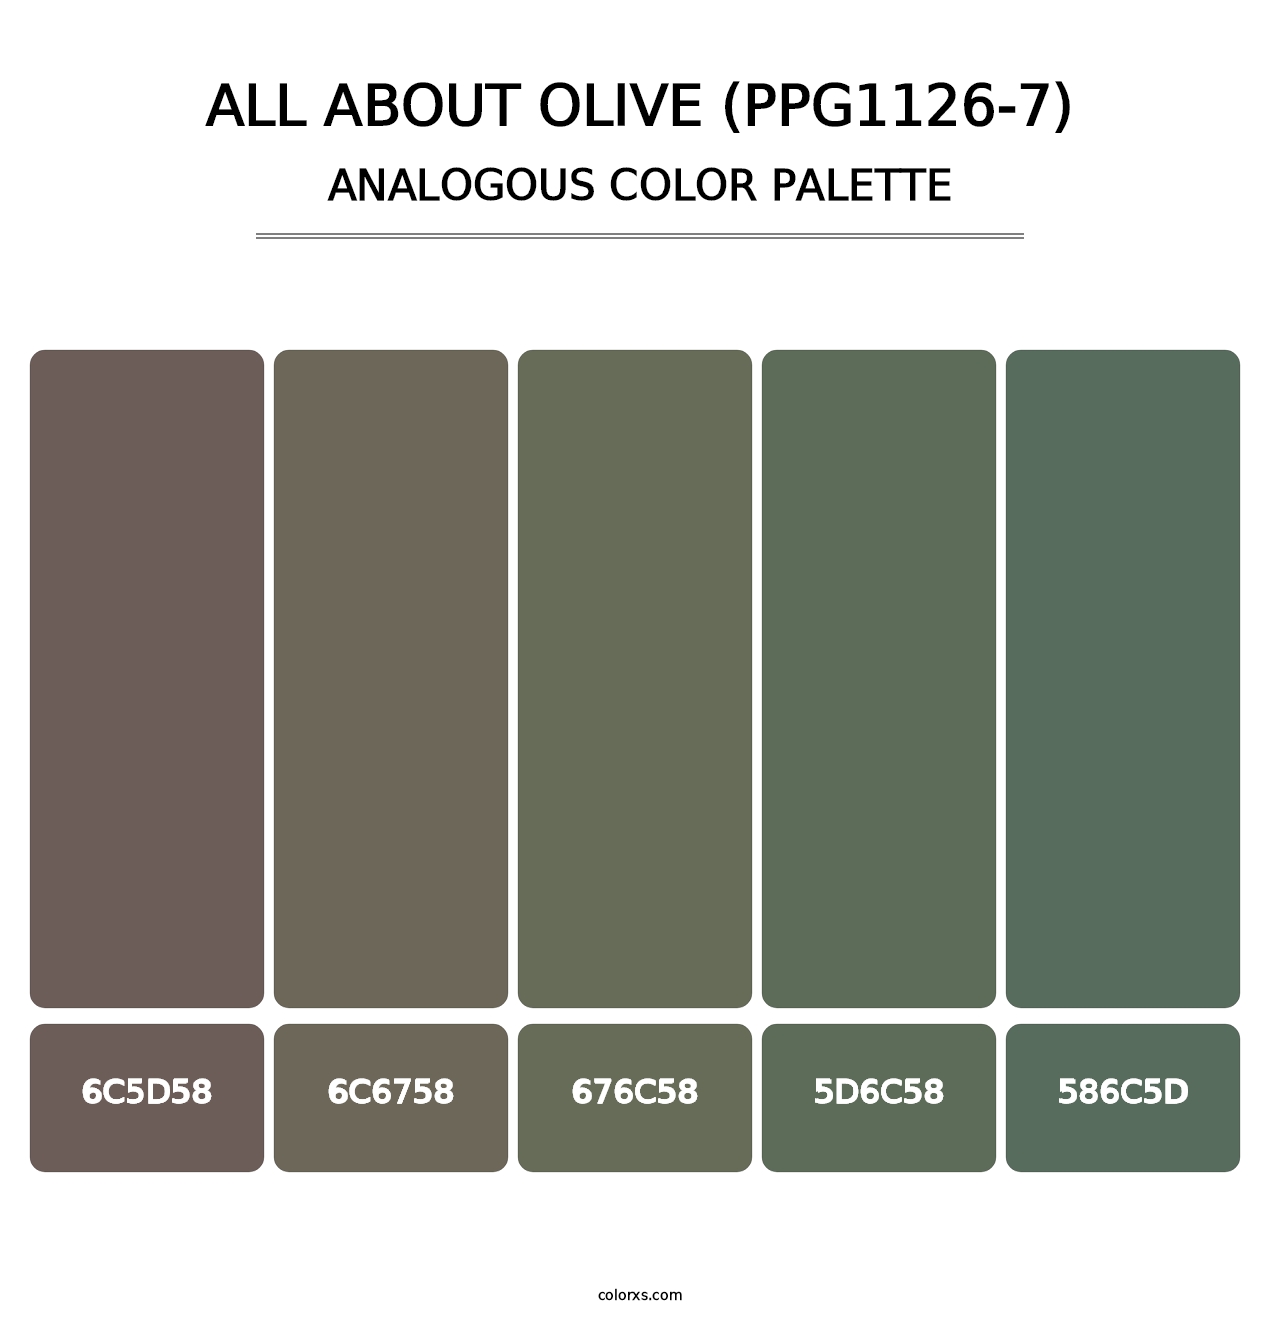 All About Olive (PPG1126-7) - Analogous Color Palette